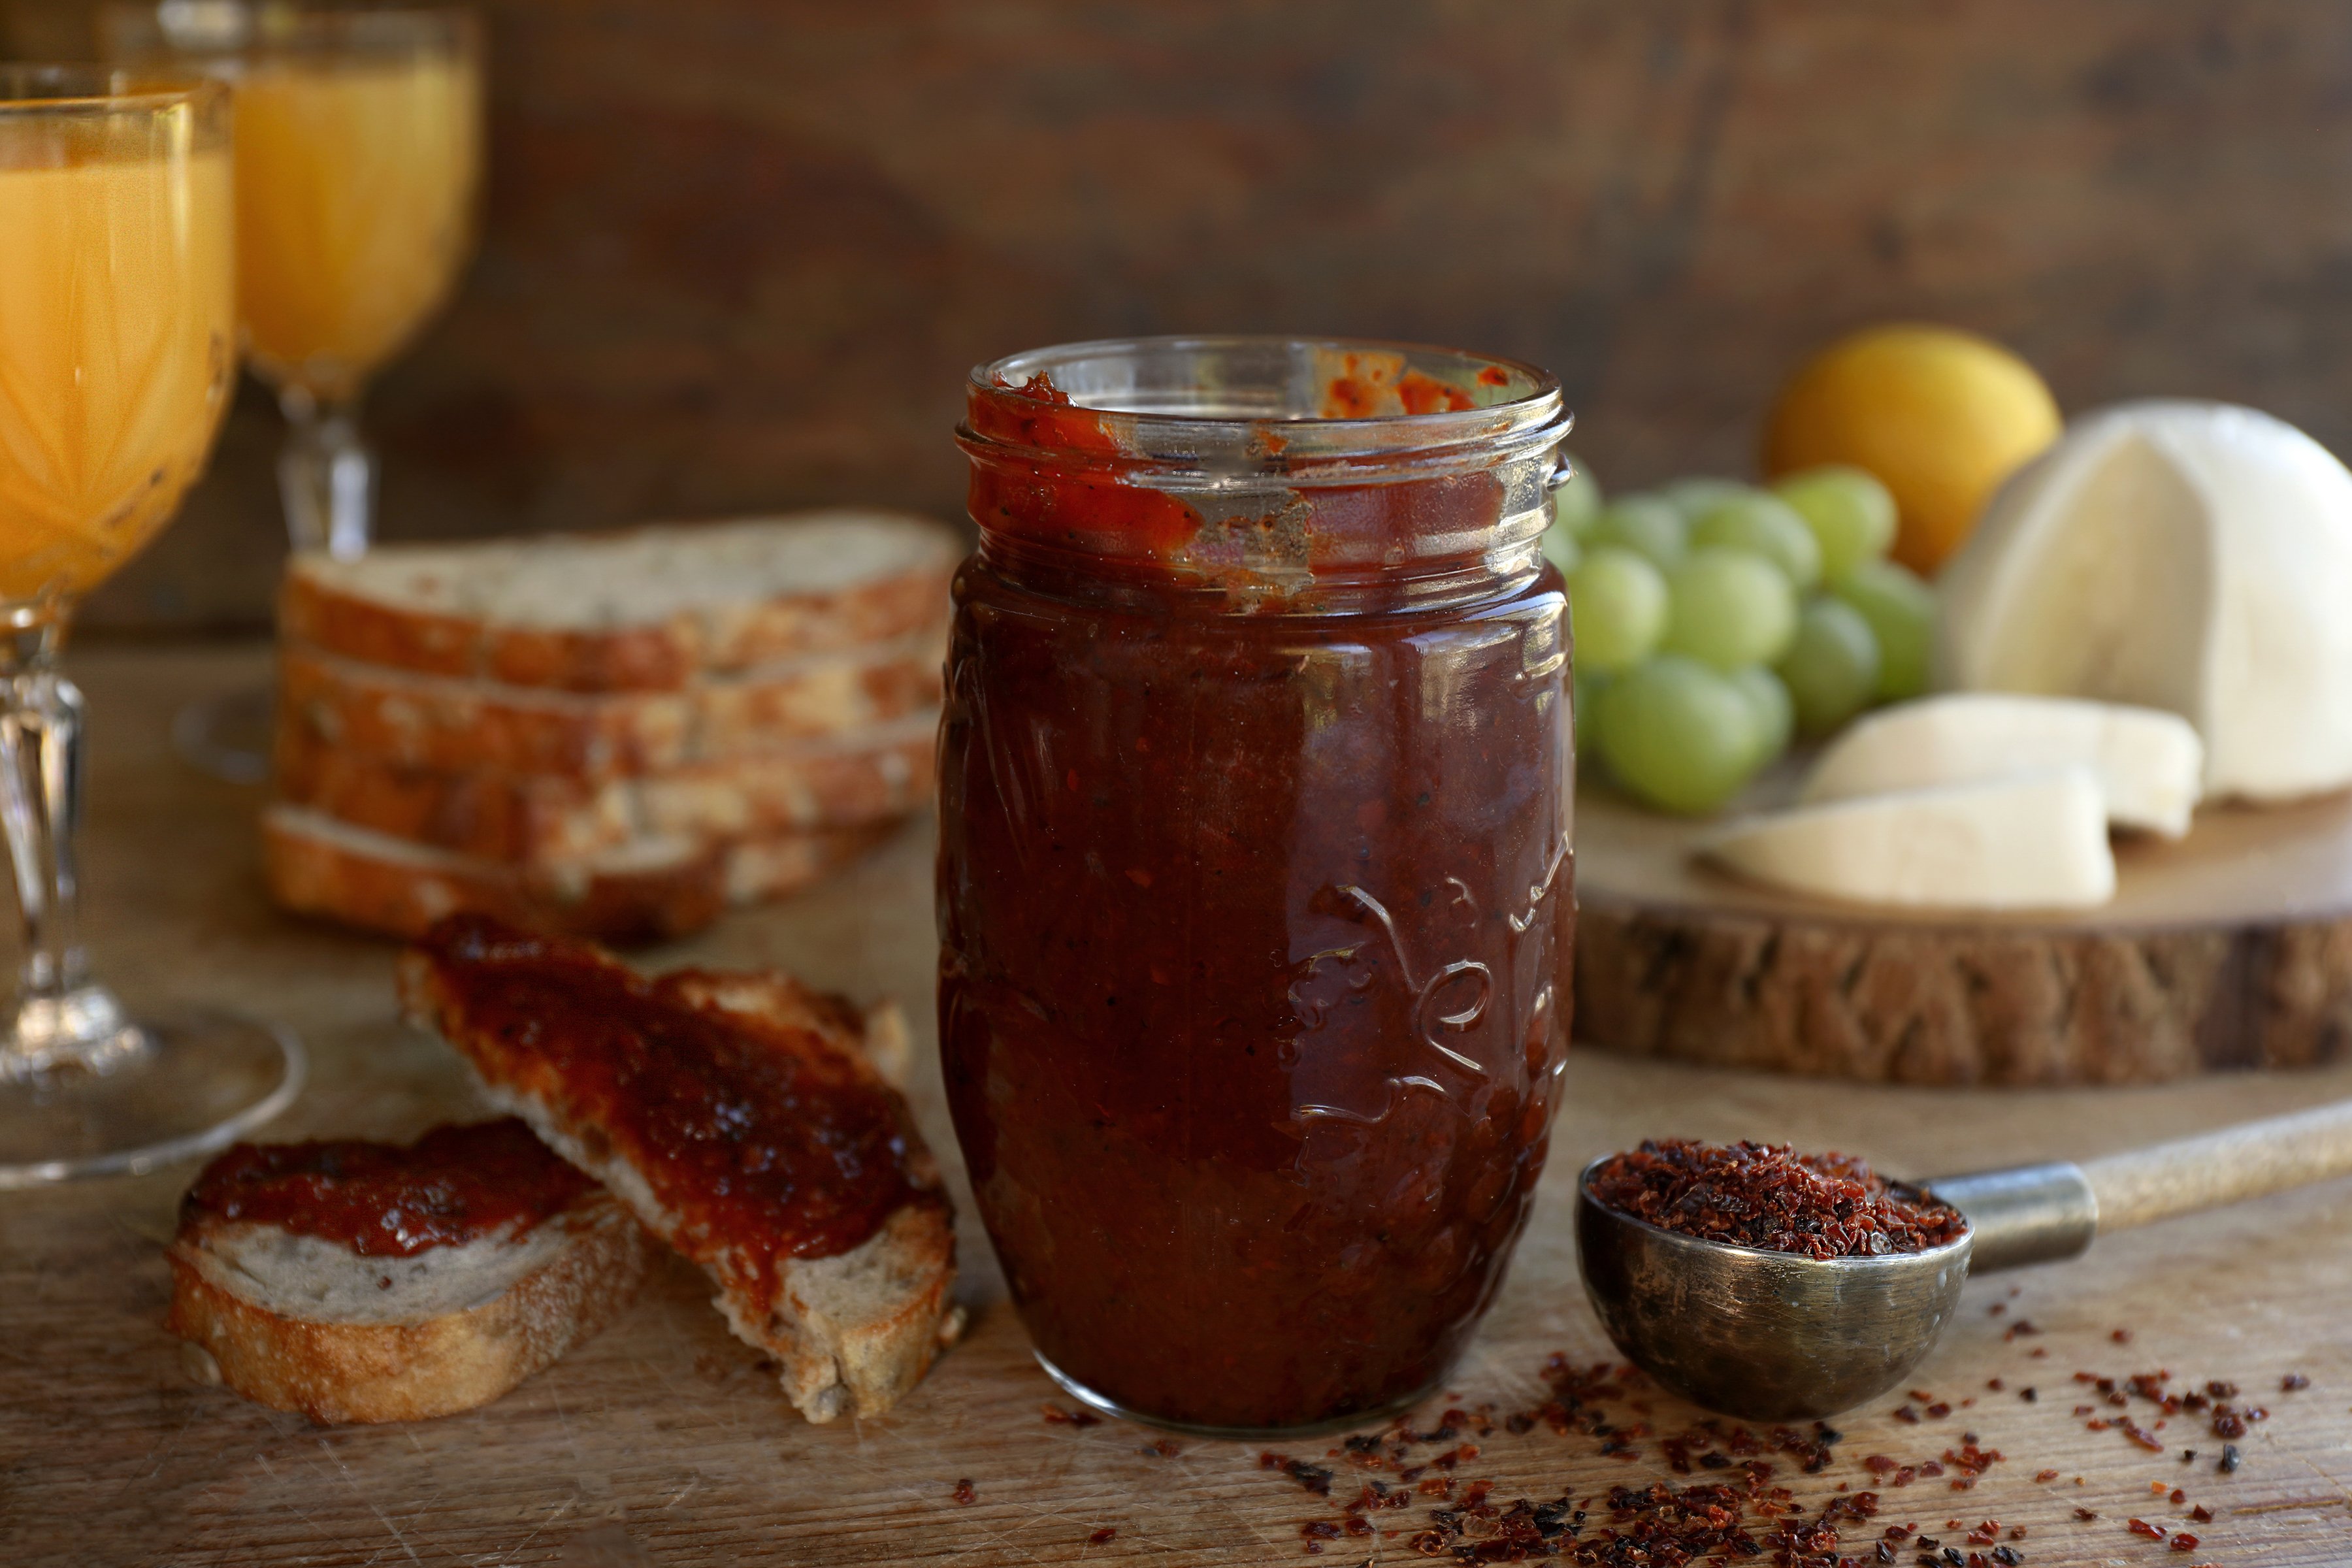 A jar of homemade rosehip jam using dried rosehips and other ingredients. Toasted whole grain bread and a cheese and fruit board with orange juice in the background.